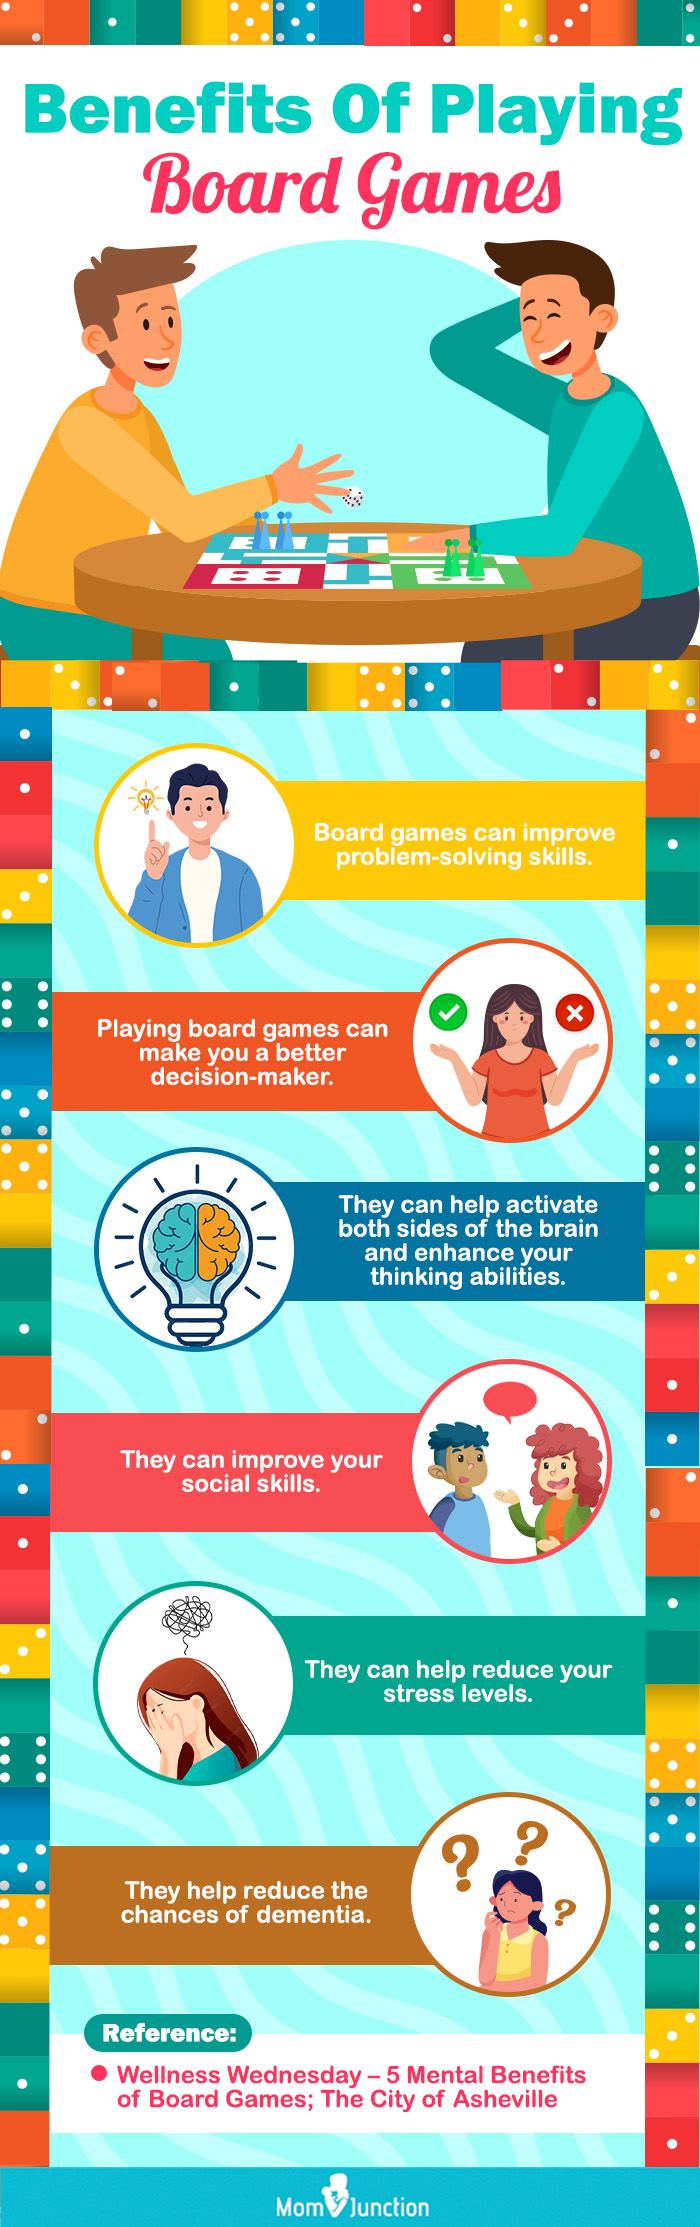 Benefits Of Playing Board Games